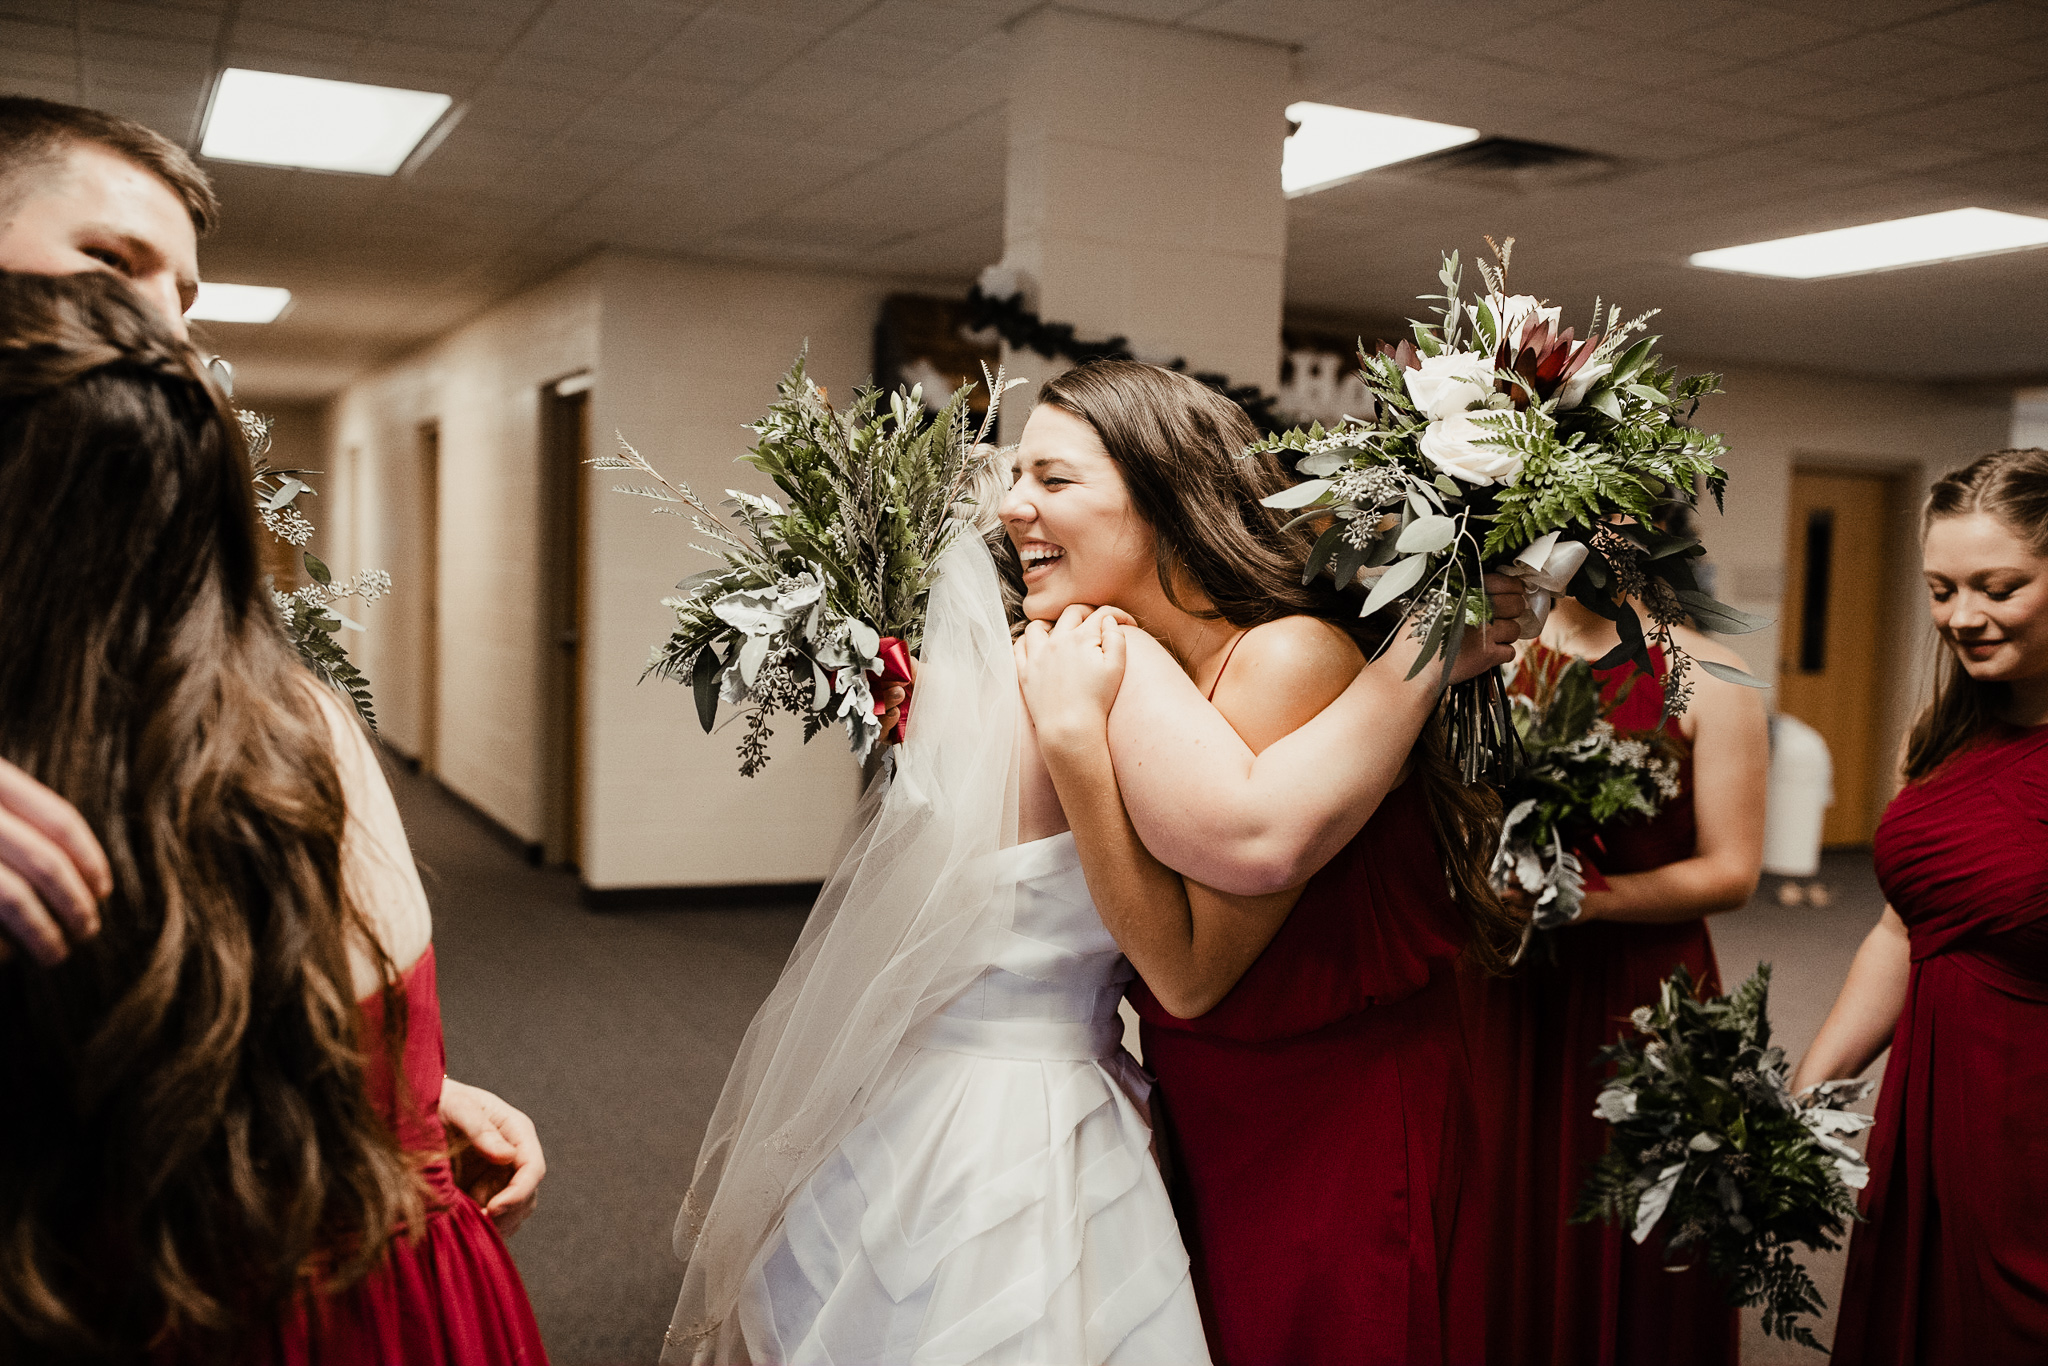 The Bridesmaid-Photographer: How to Shoot a Wedding...And Be In It | Ohio Wedding + Engagement Photographer | Catherine Milliron Photography